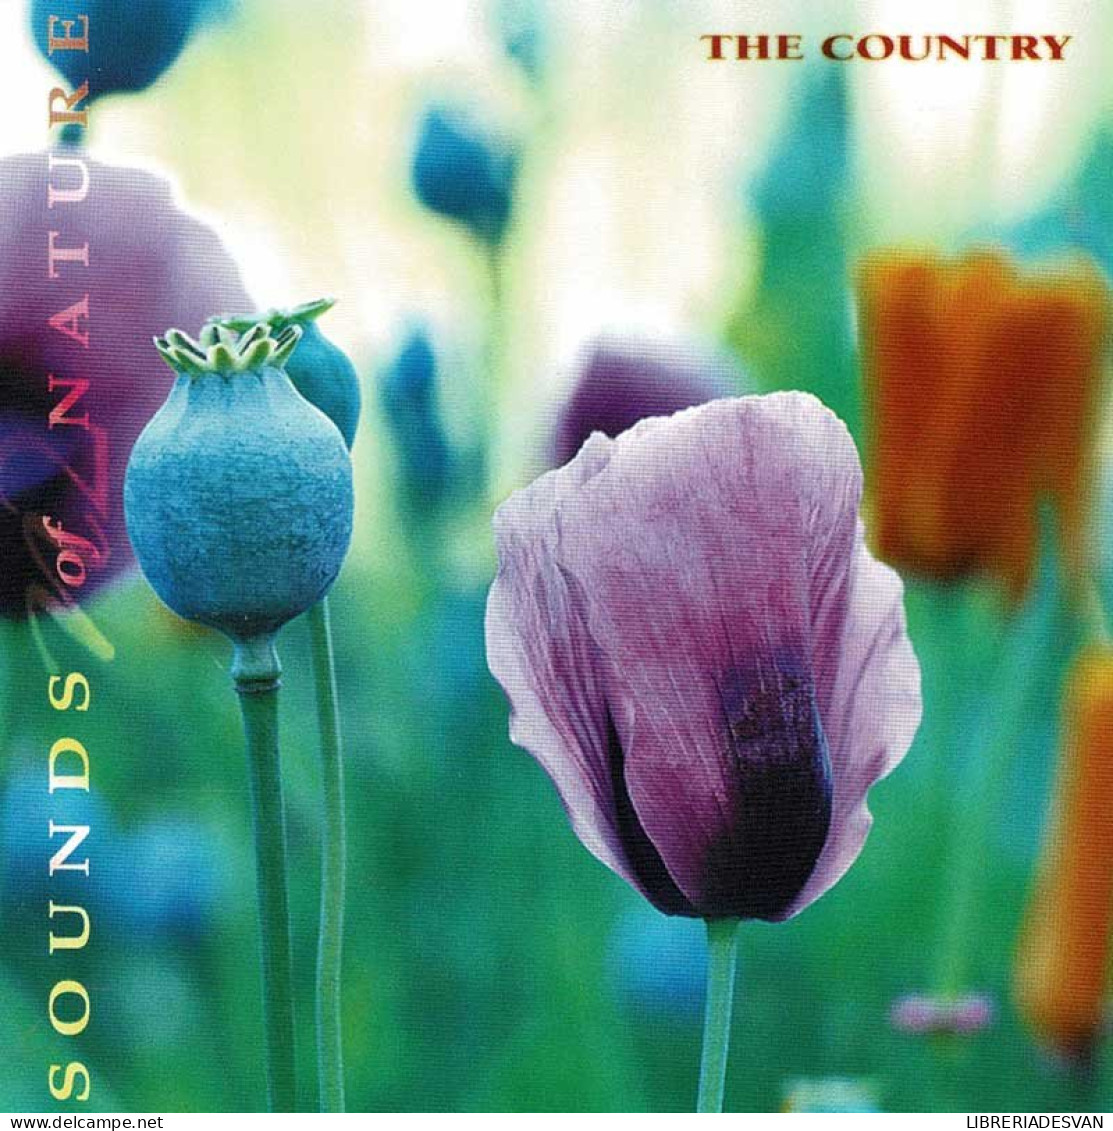 Paul Rayner-Brown - The Country - Sounds Of Nature. CD - New Age